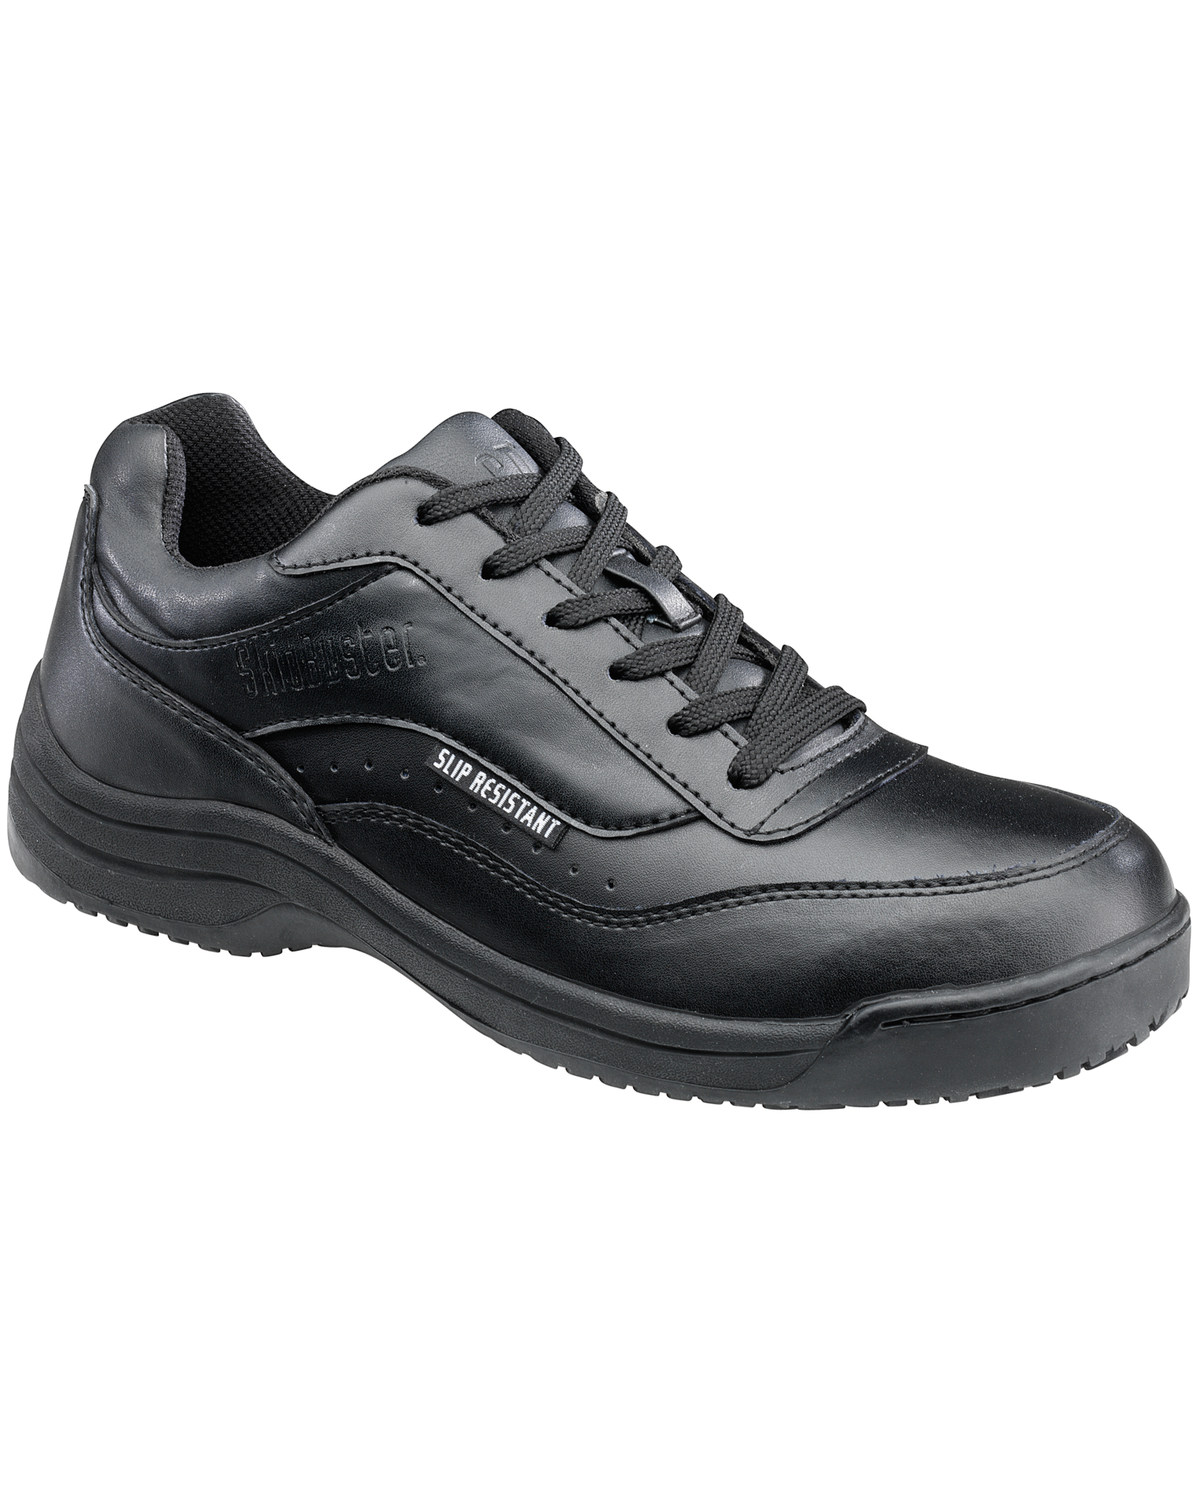 business casual slip resistant shoes